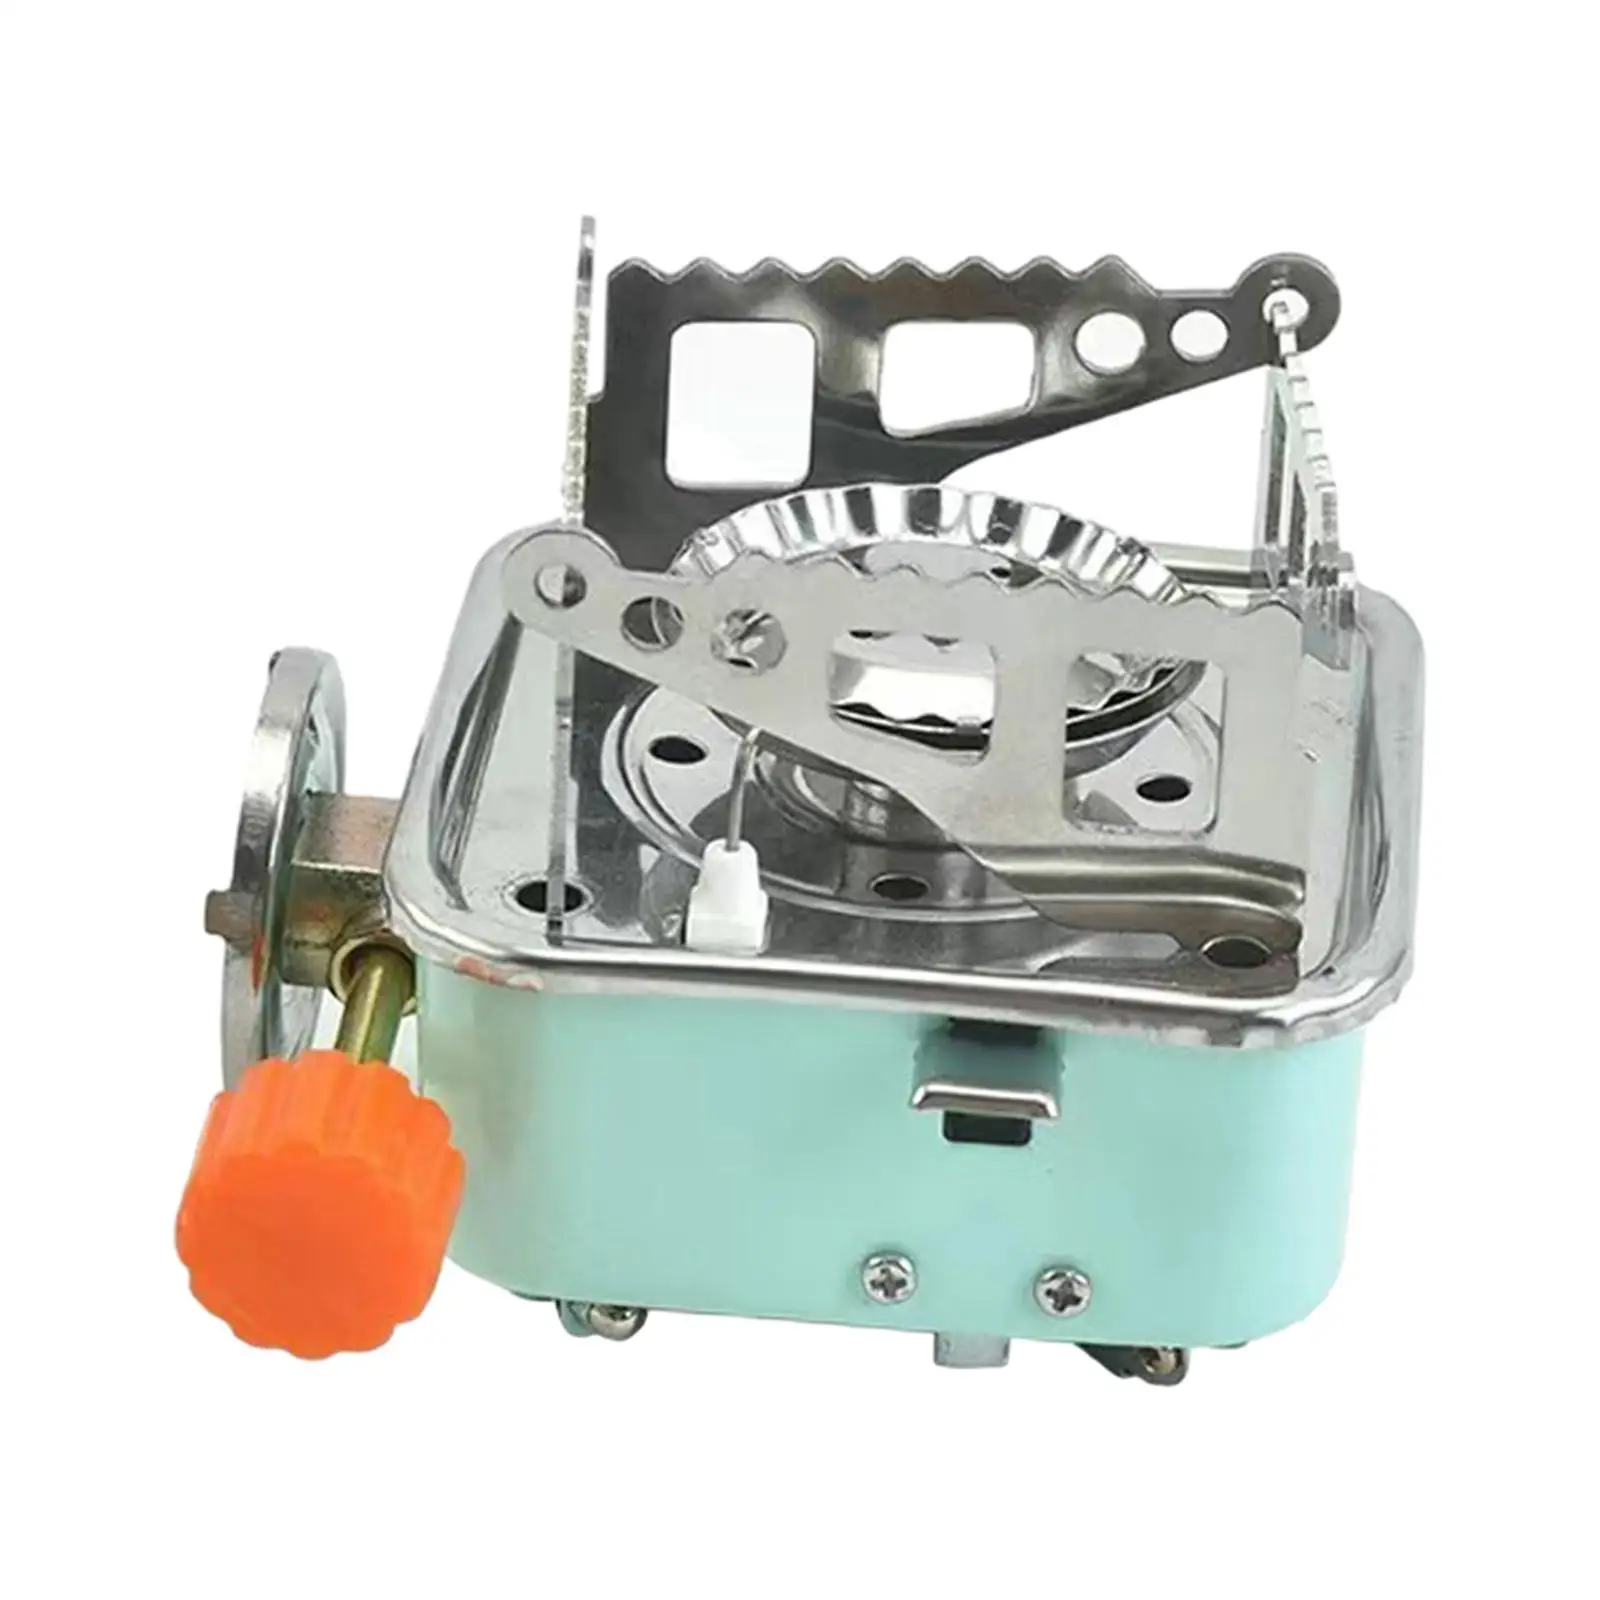 Gas Stove Portable Windproof Pocket Camping Stove for Hiking Barbecue Picnic